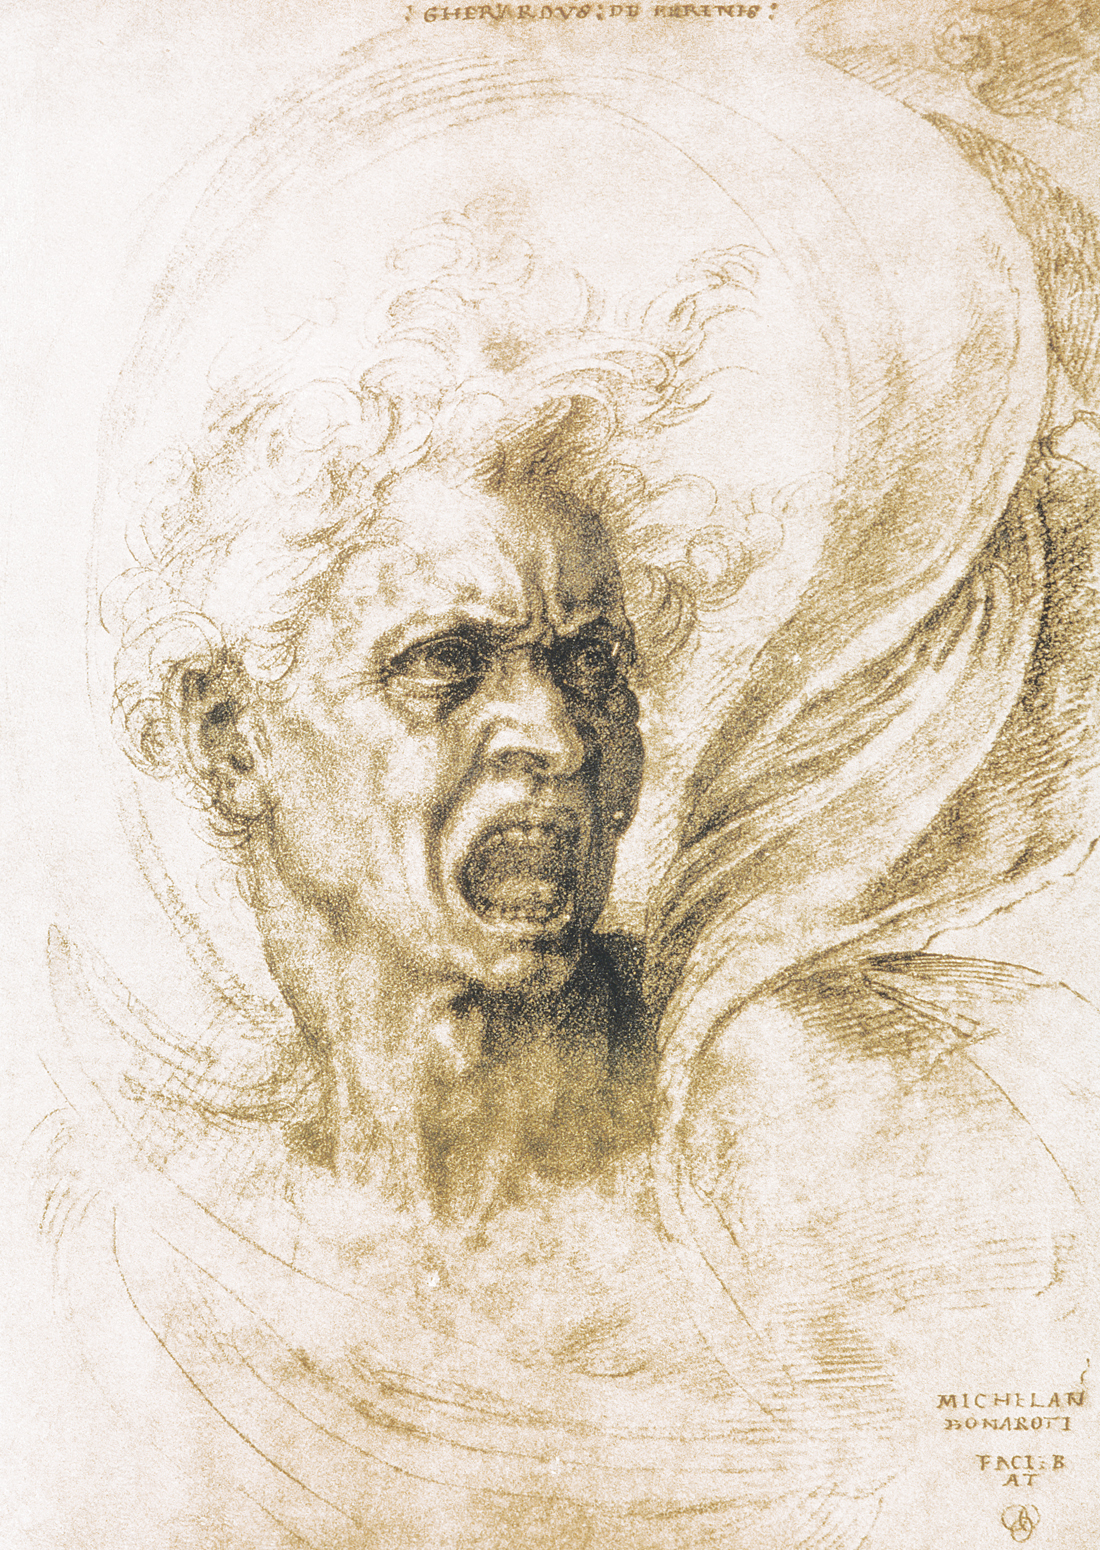 . The Damned Soul or Fury, by Michelangelo Buonarroti, c. 1525. Uffizi Gallery, Florence, Italy. 